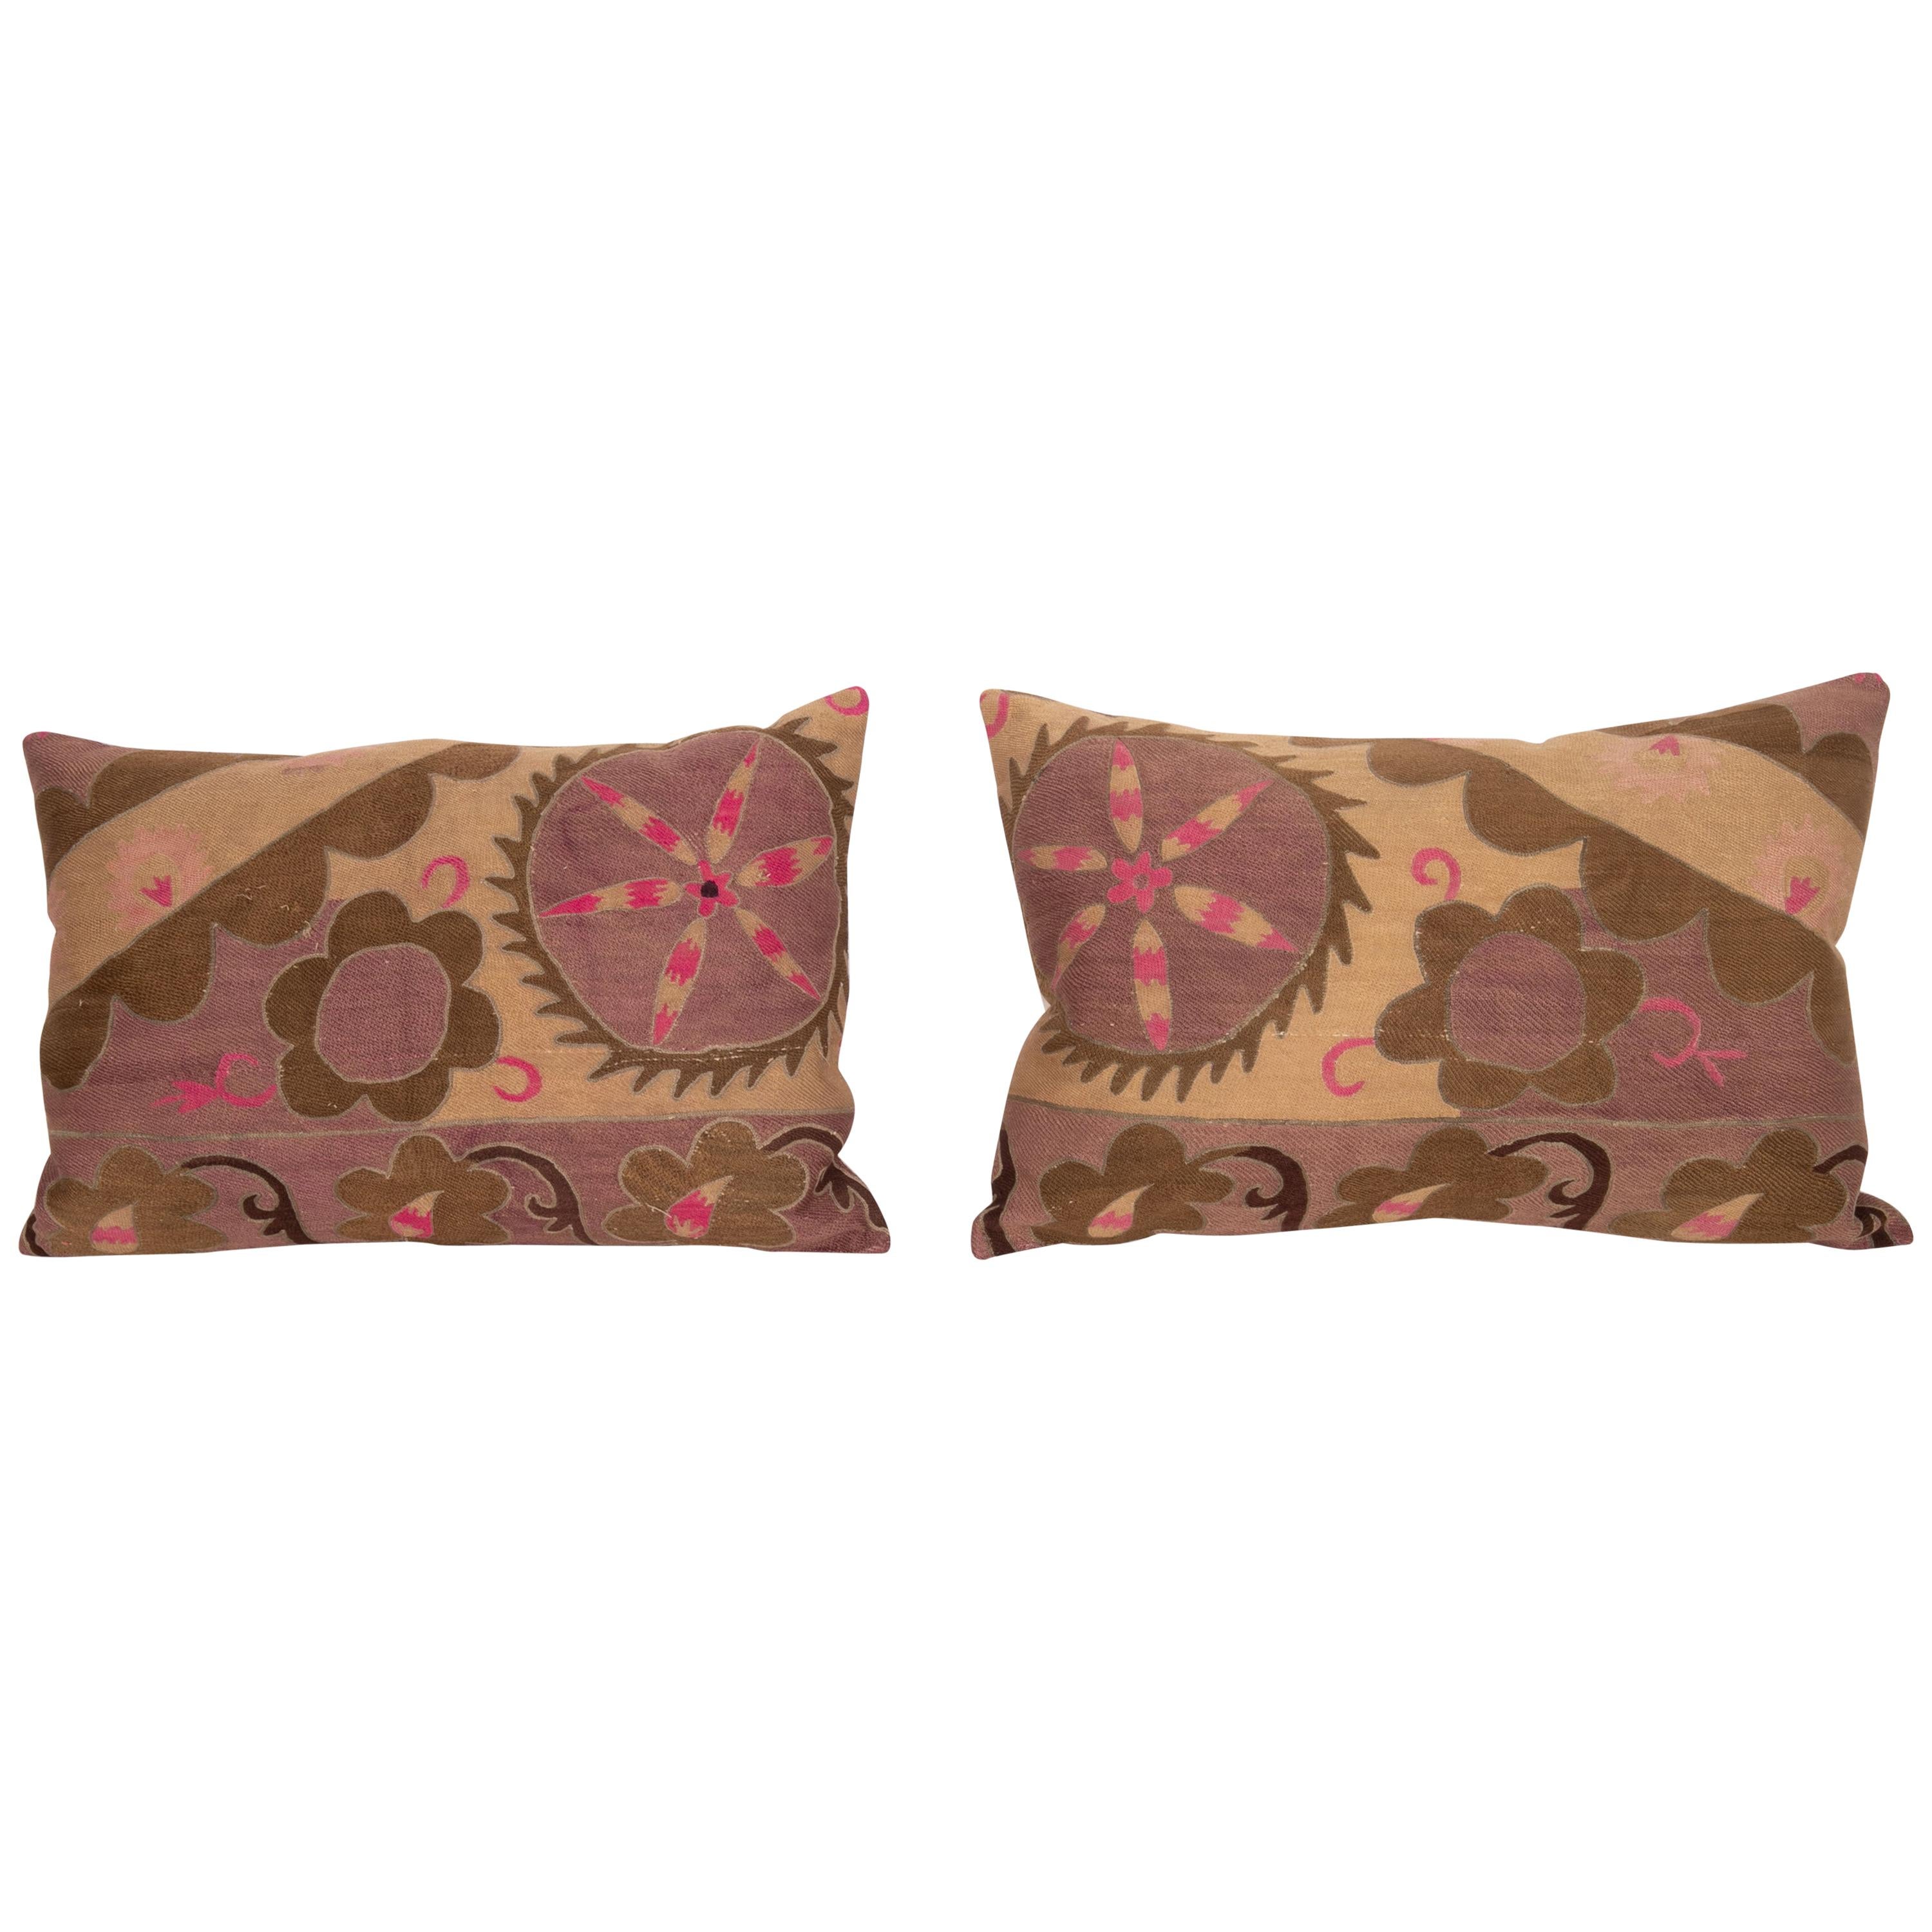 Suzani Pillow Cases Made from an Early 20th Century Tashkent Suzani For Sale